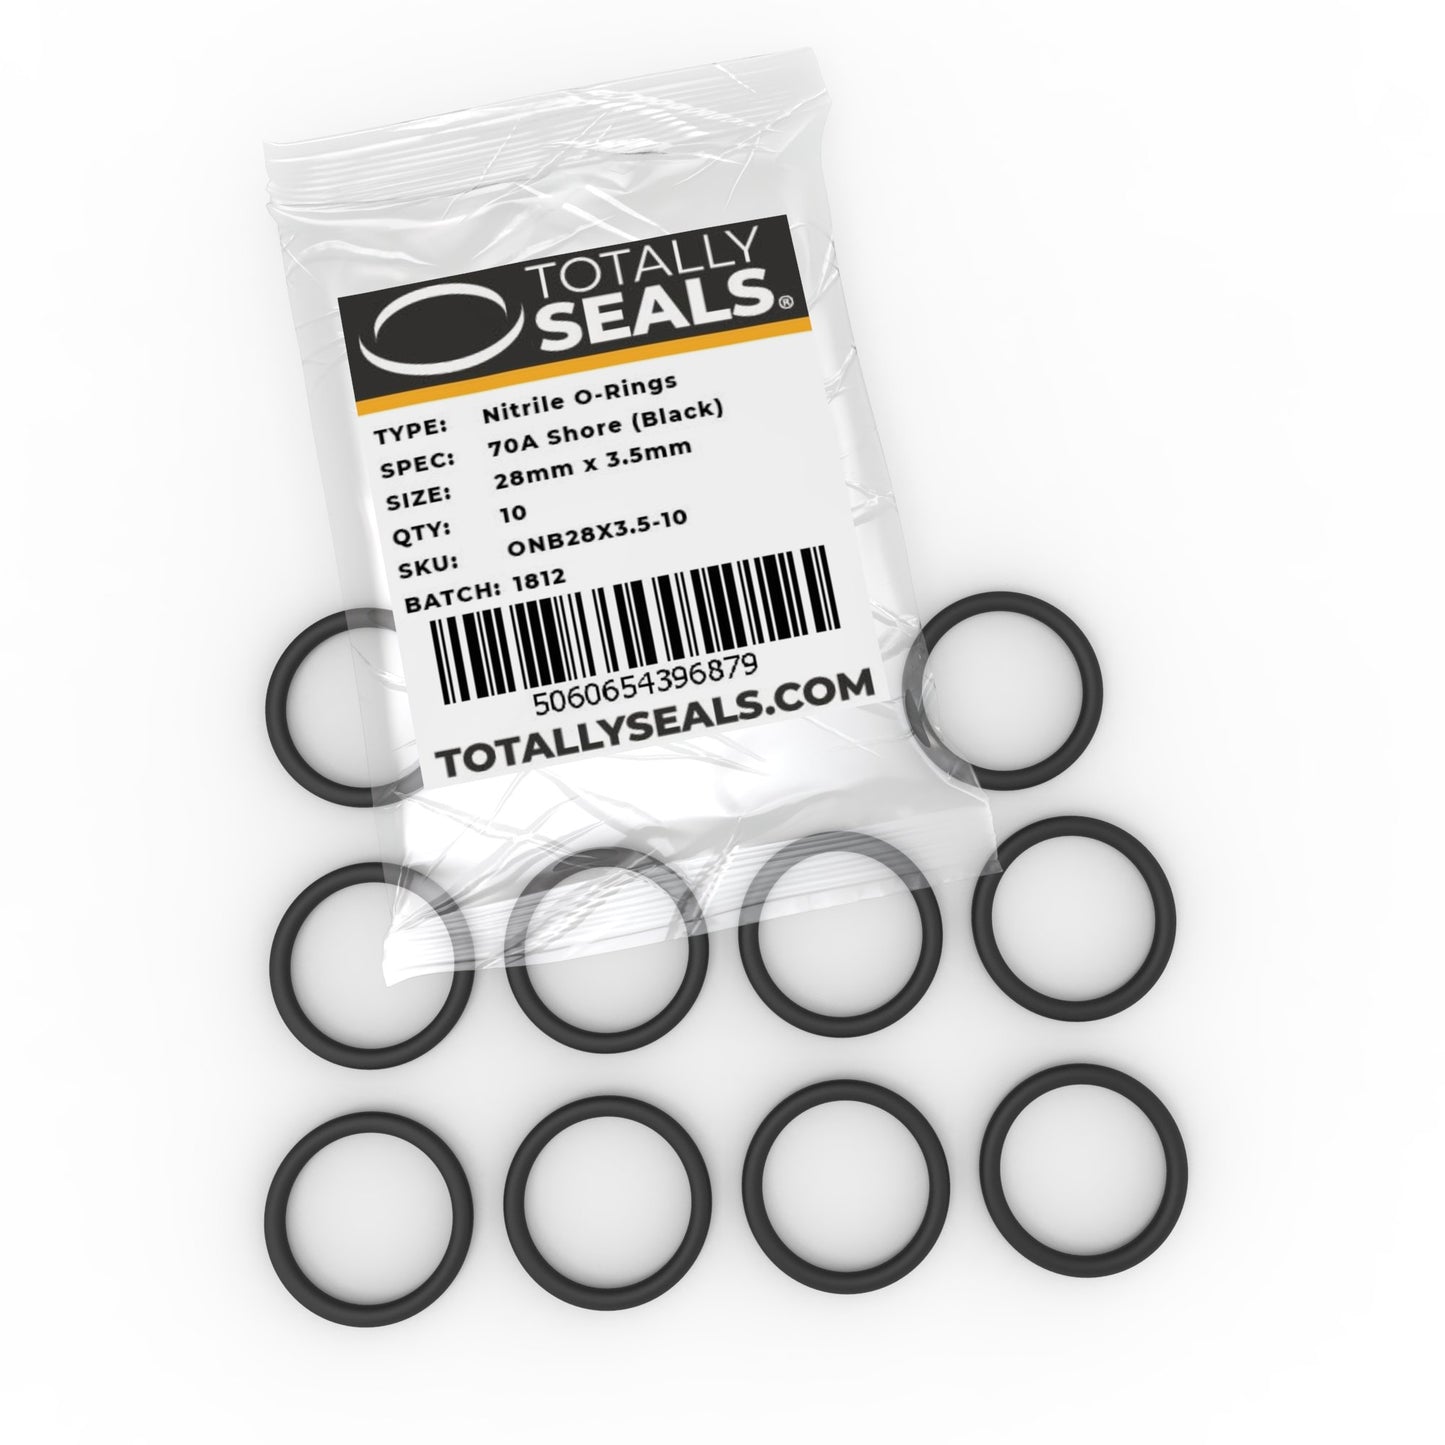 28mm x 3.5mm (35mm OD) Nitrile O-Rings - Totally Seals®